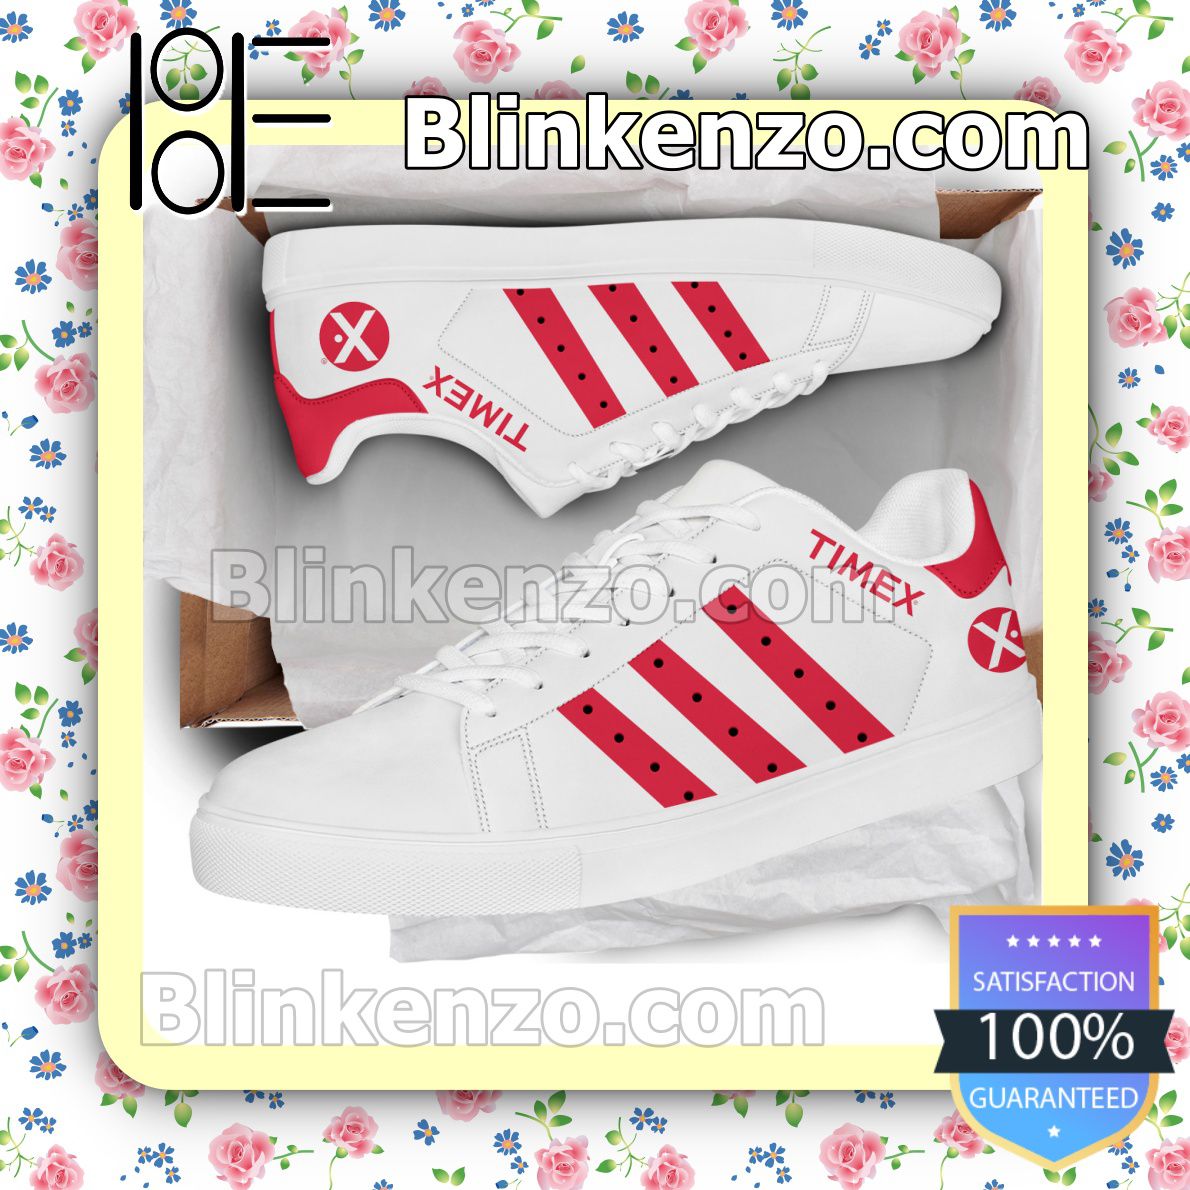 Timex Company Brand Adidas Low Top Shoes